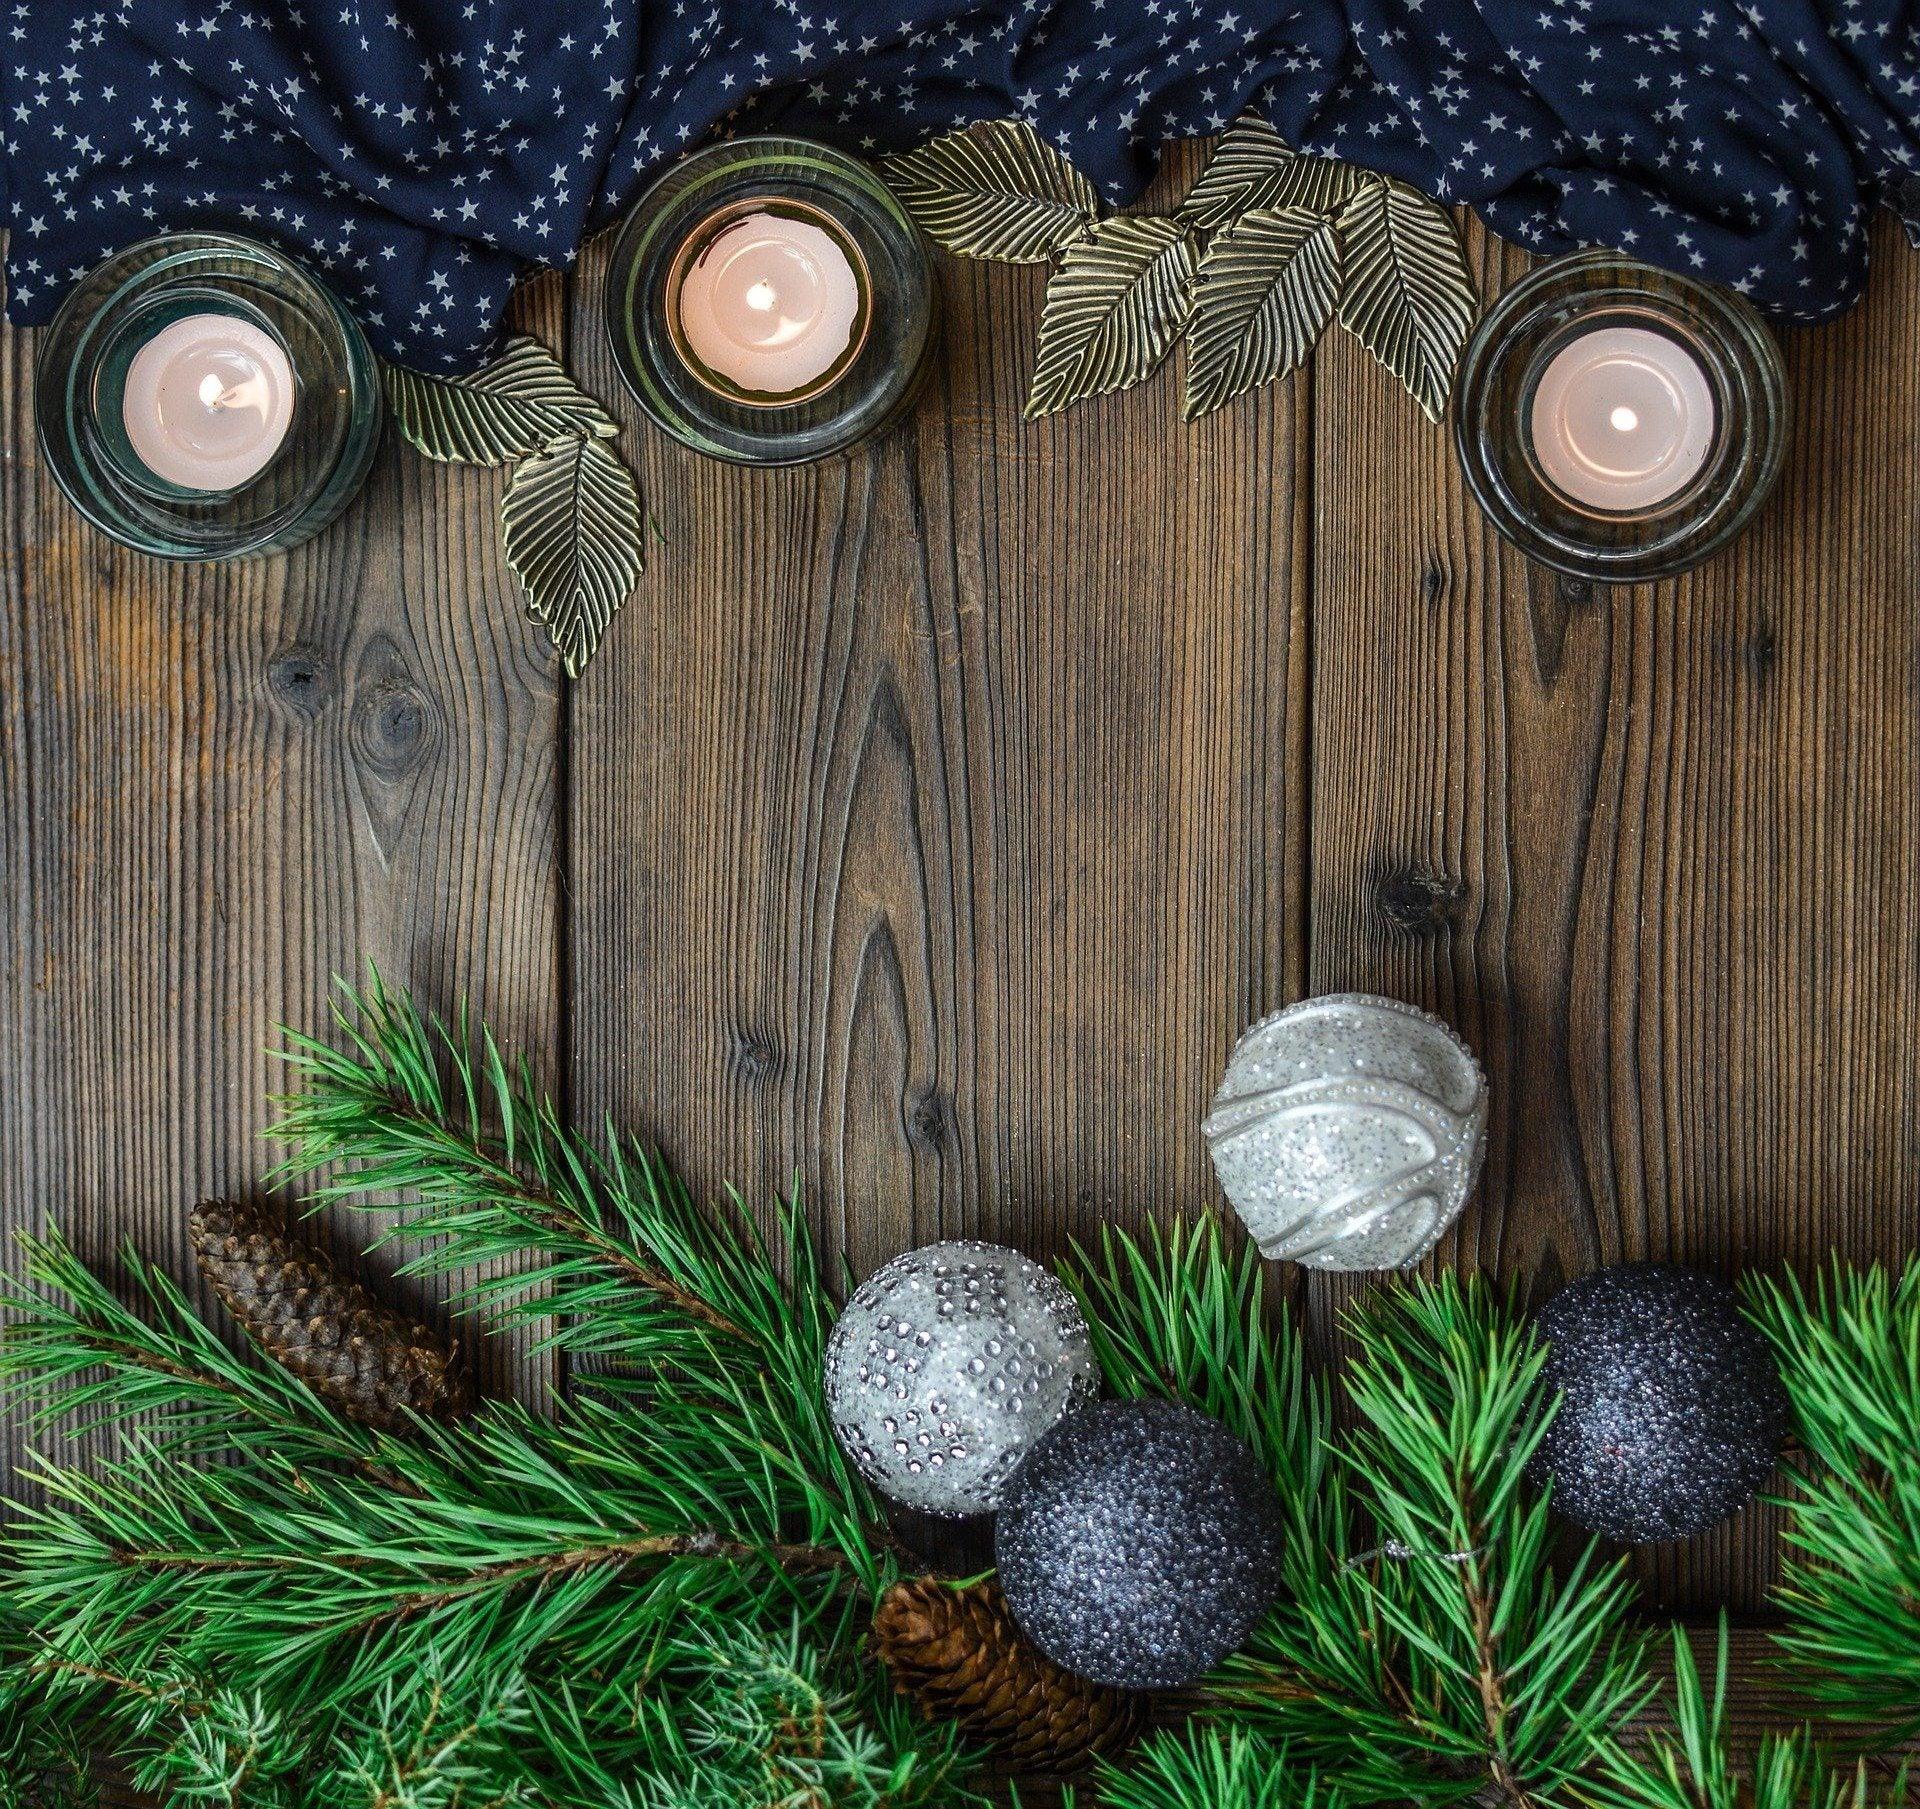 Fill Your Home With Our Favorite Seasonal Scents - A Rustic Feeling